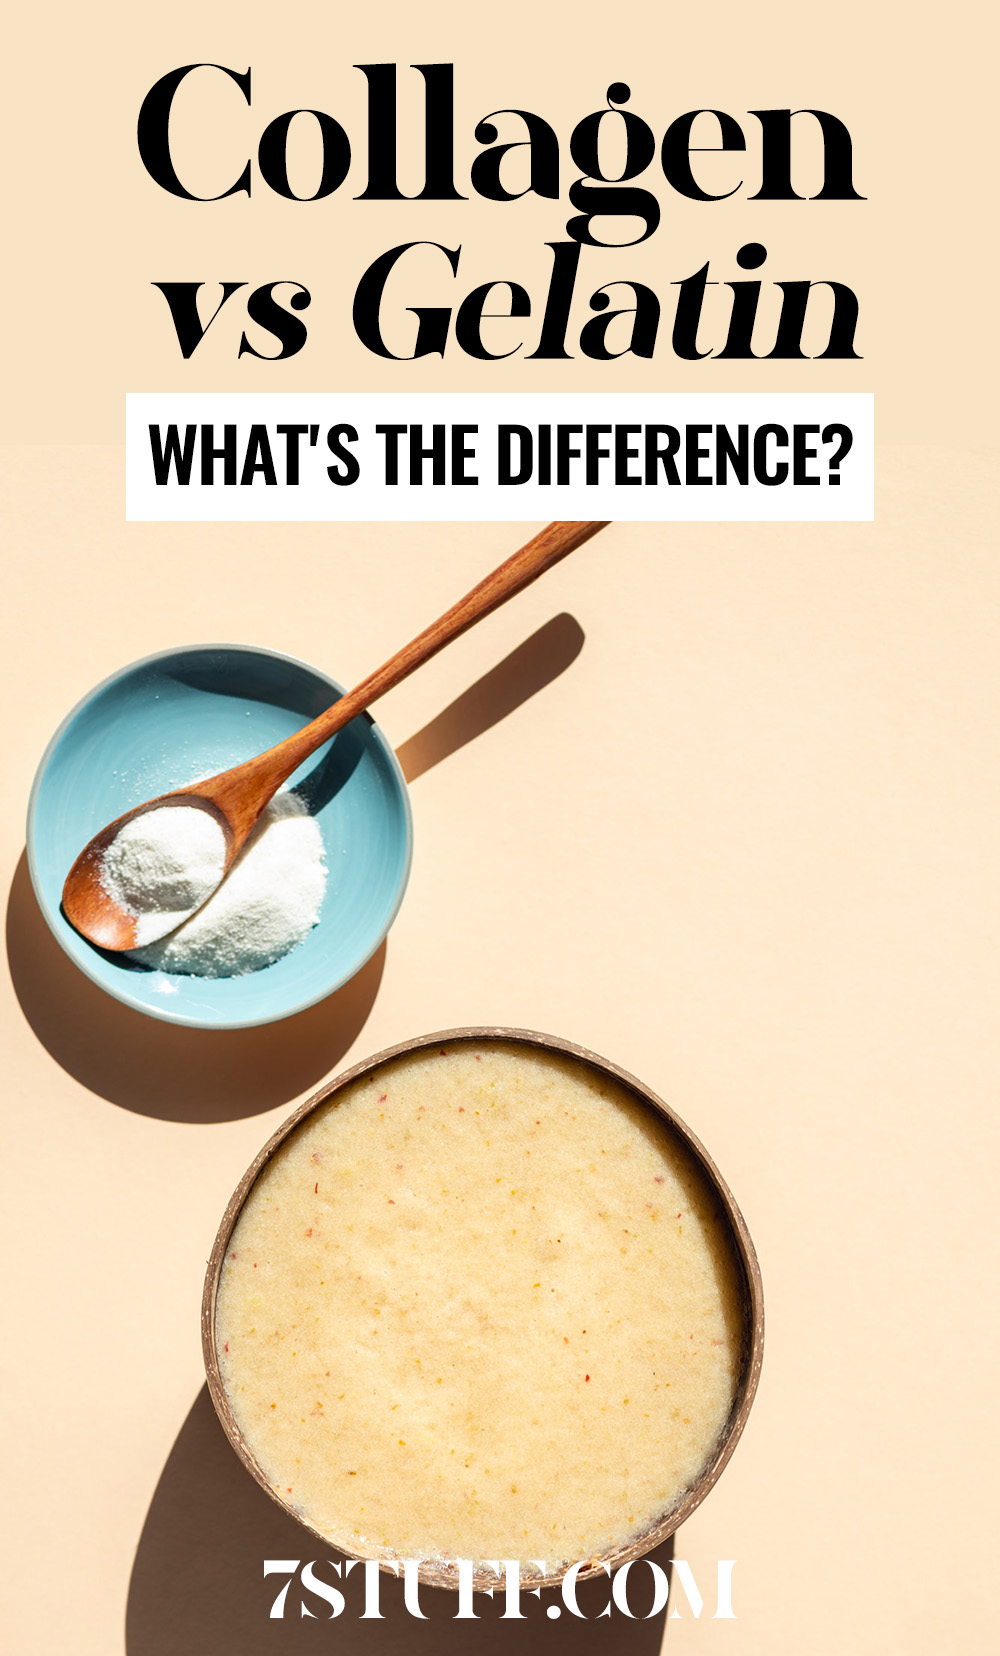 Collagen vs Gelatin: What's The Difference?